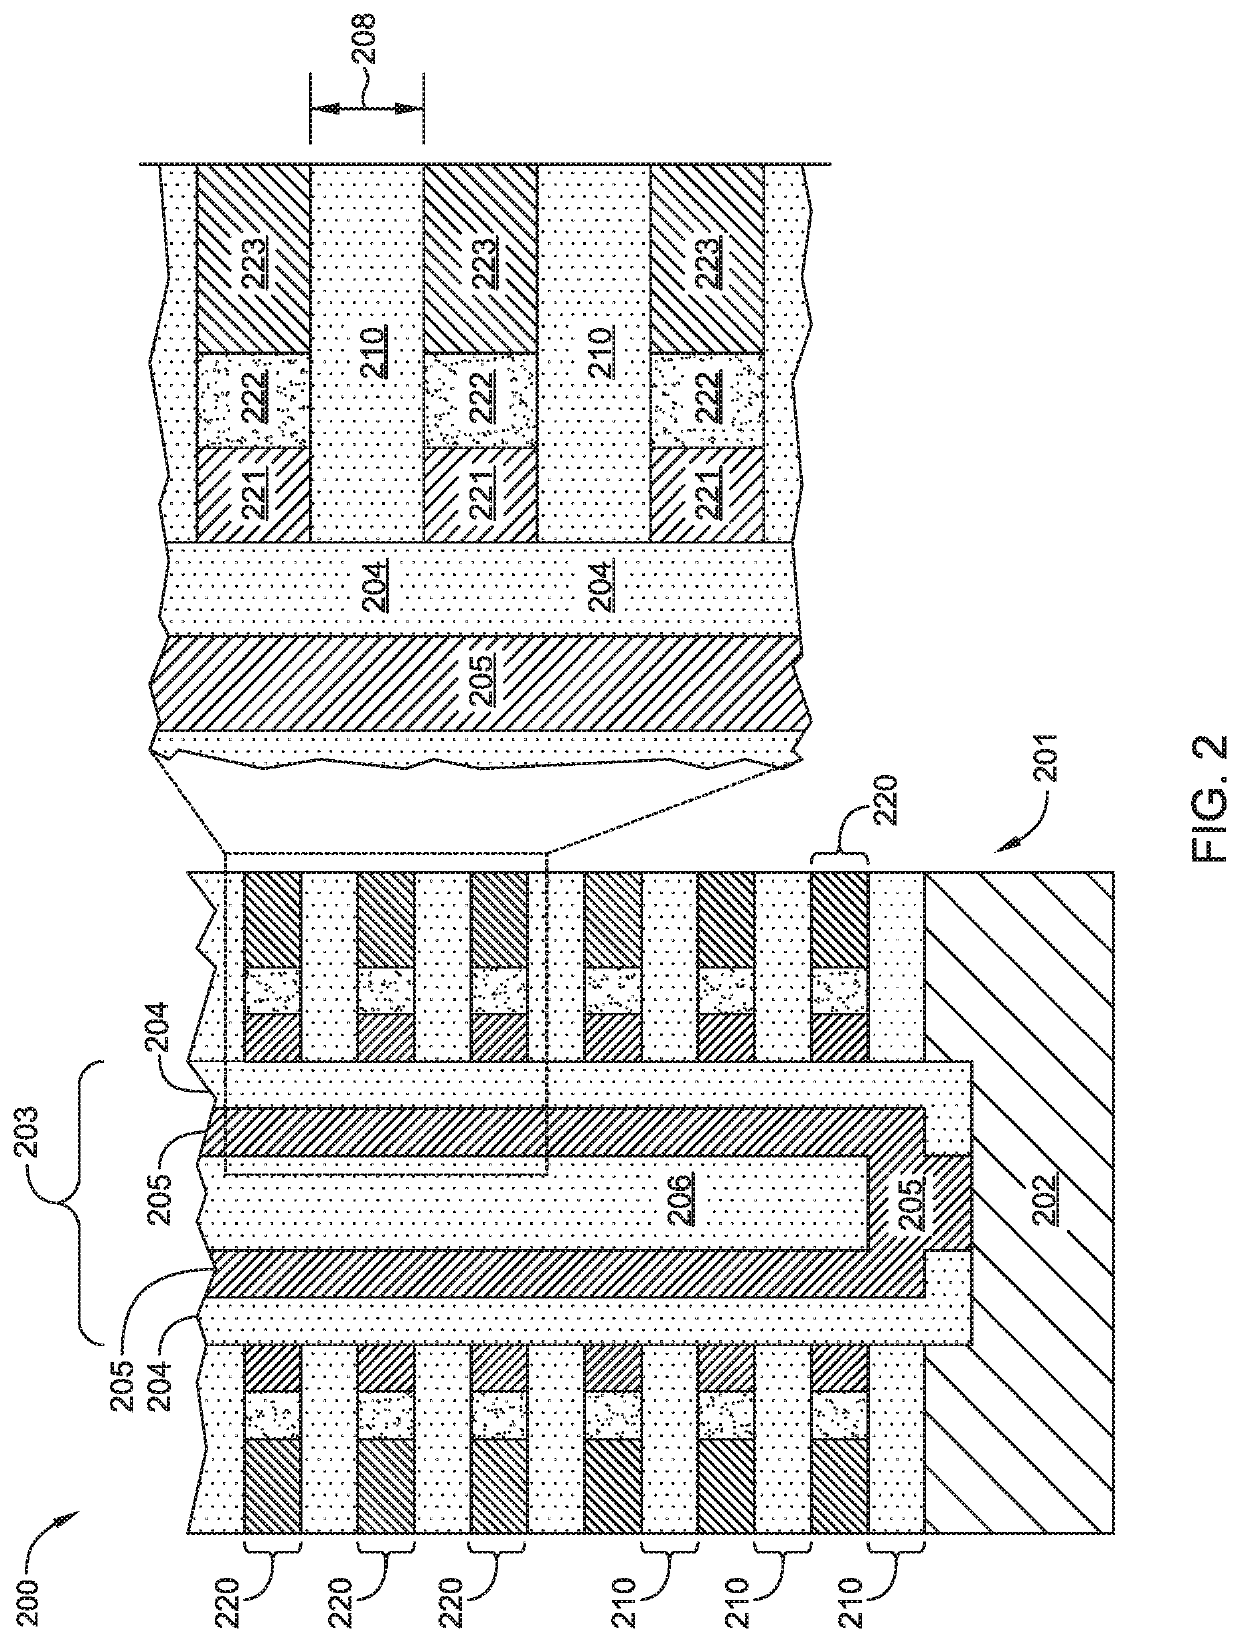 Multi-layer stacks for 3D NAND extendibility